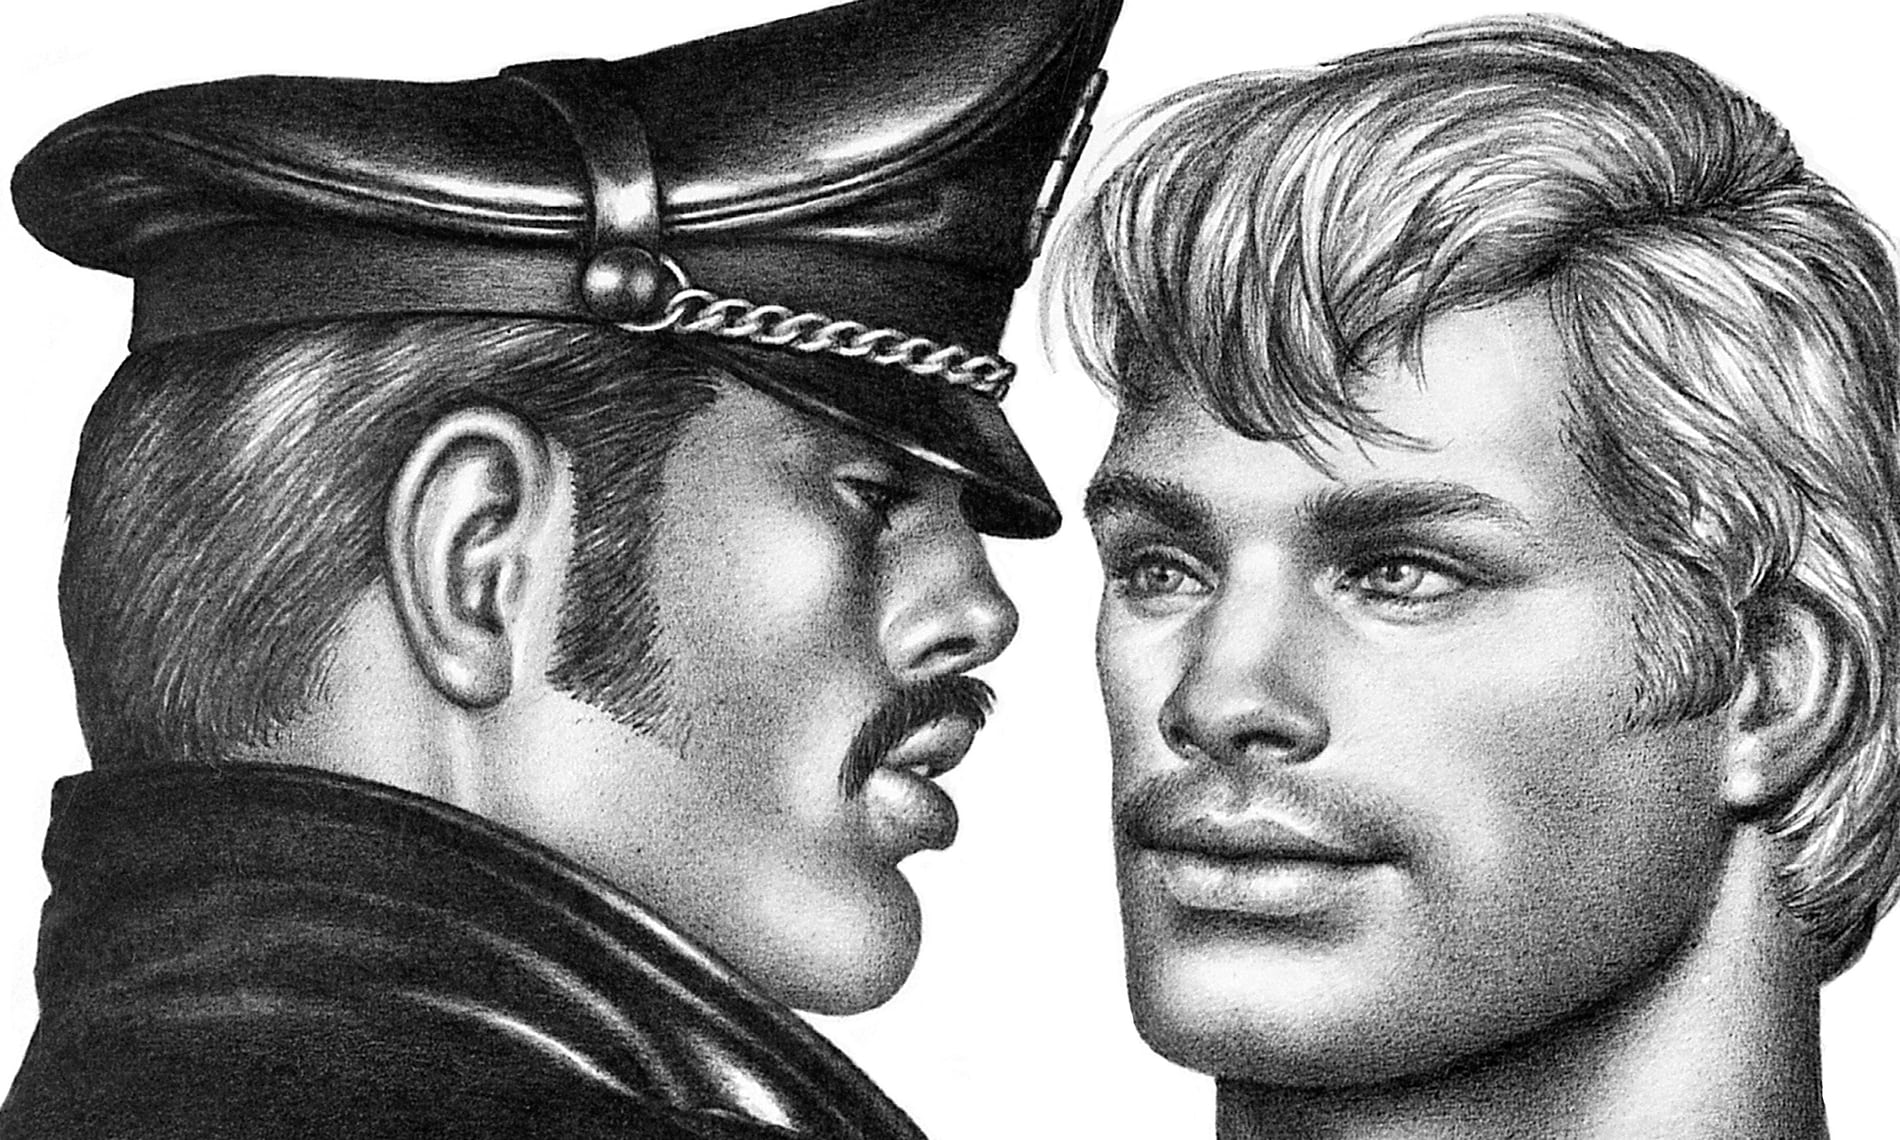 World of leather: how Tom of Finland created a legendary gay aesthetic.